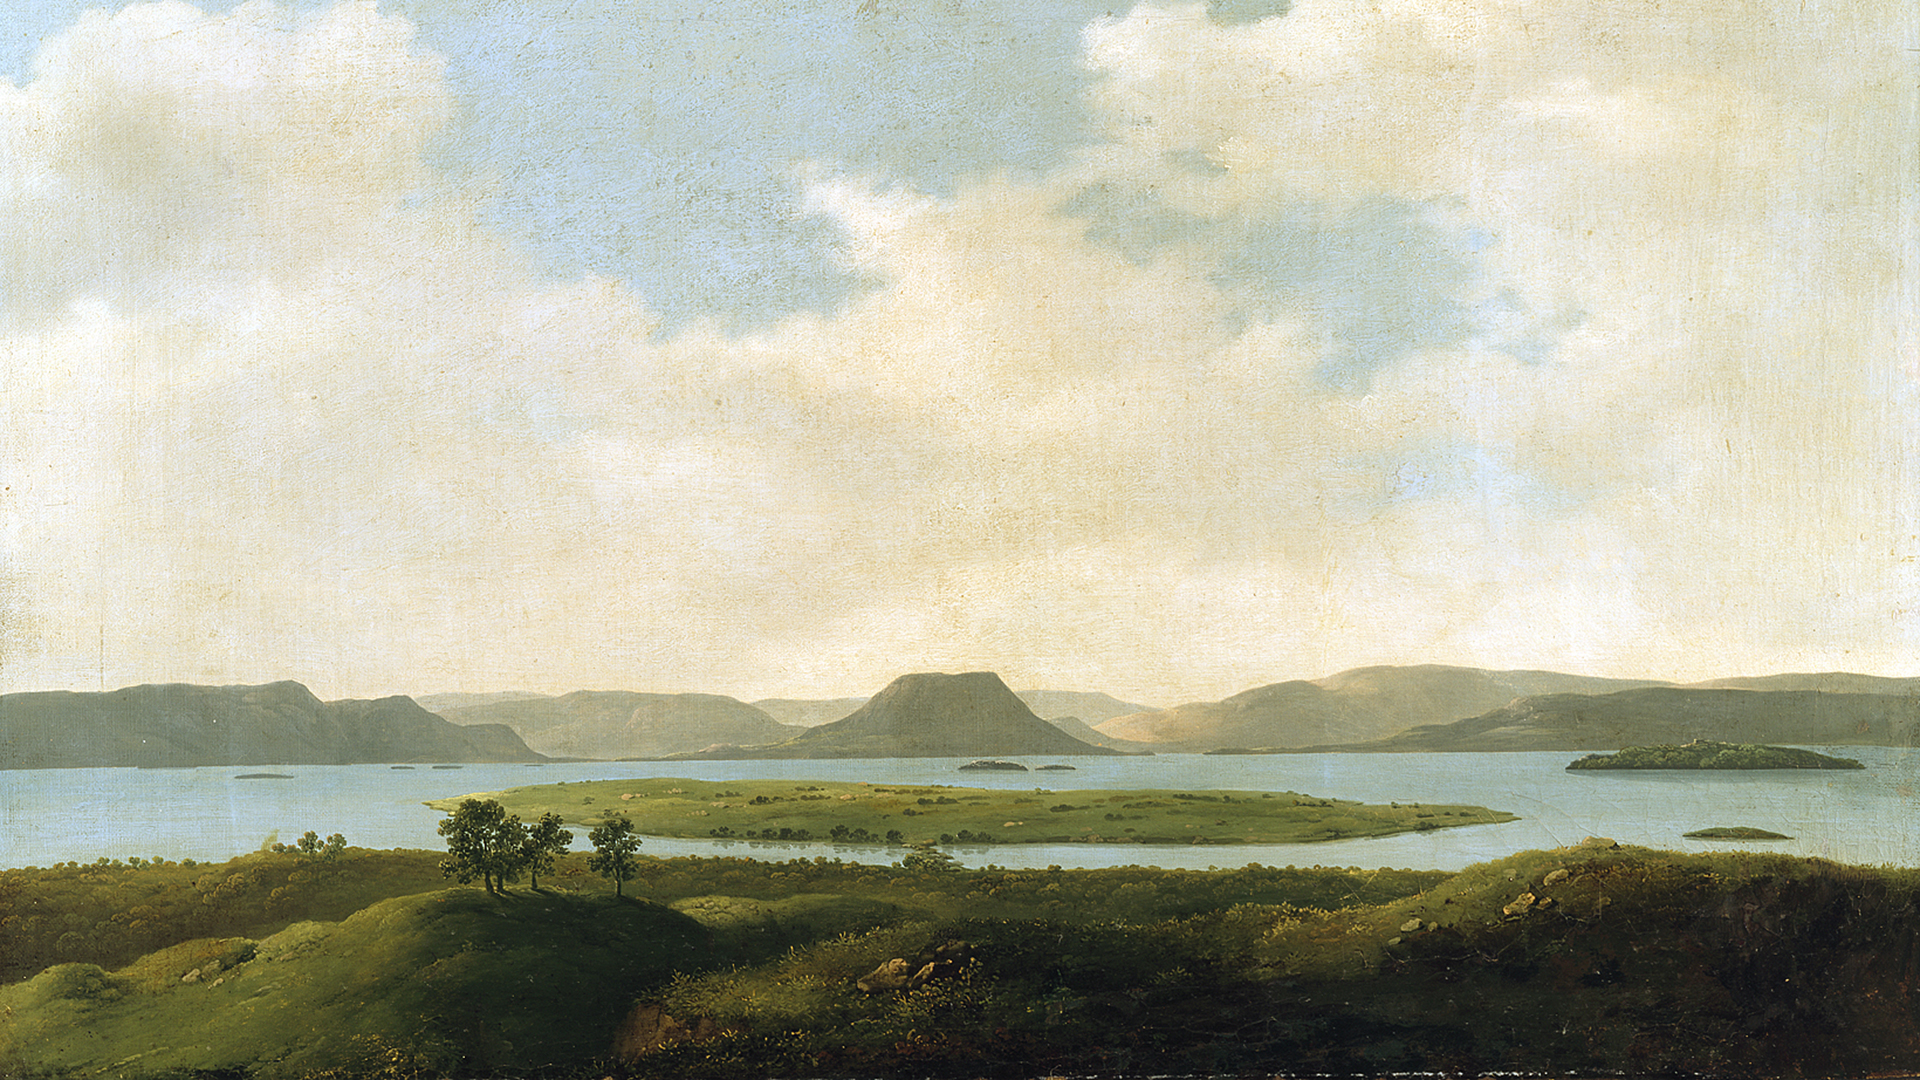 Landscape painting of a lake with a grassy island and mountains in the distance